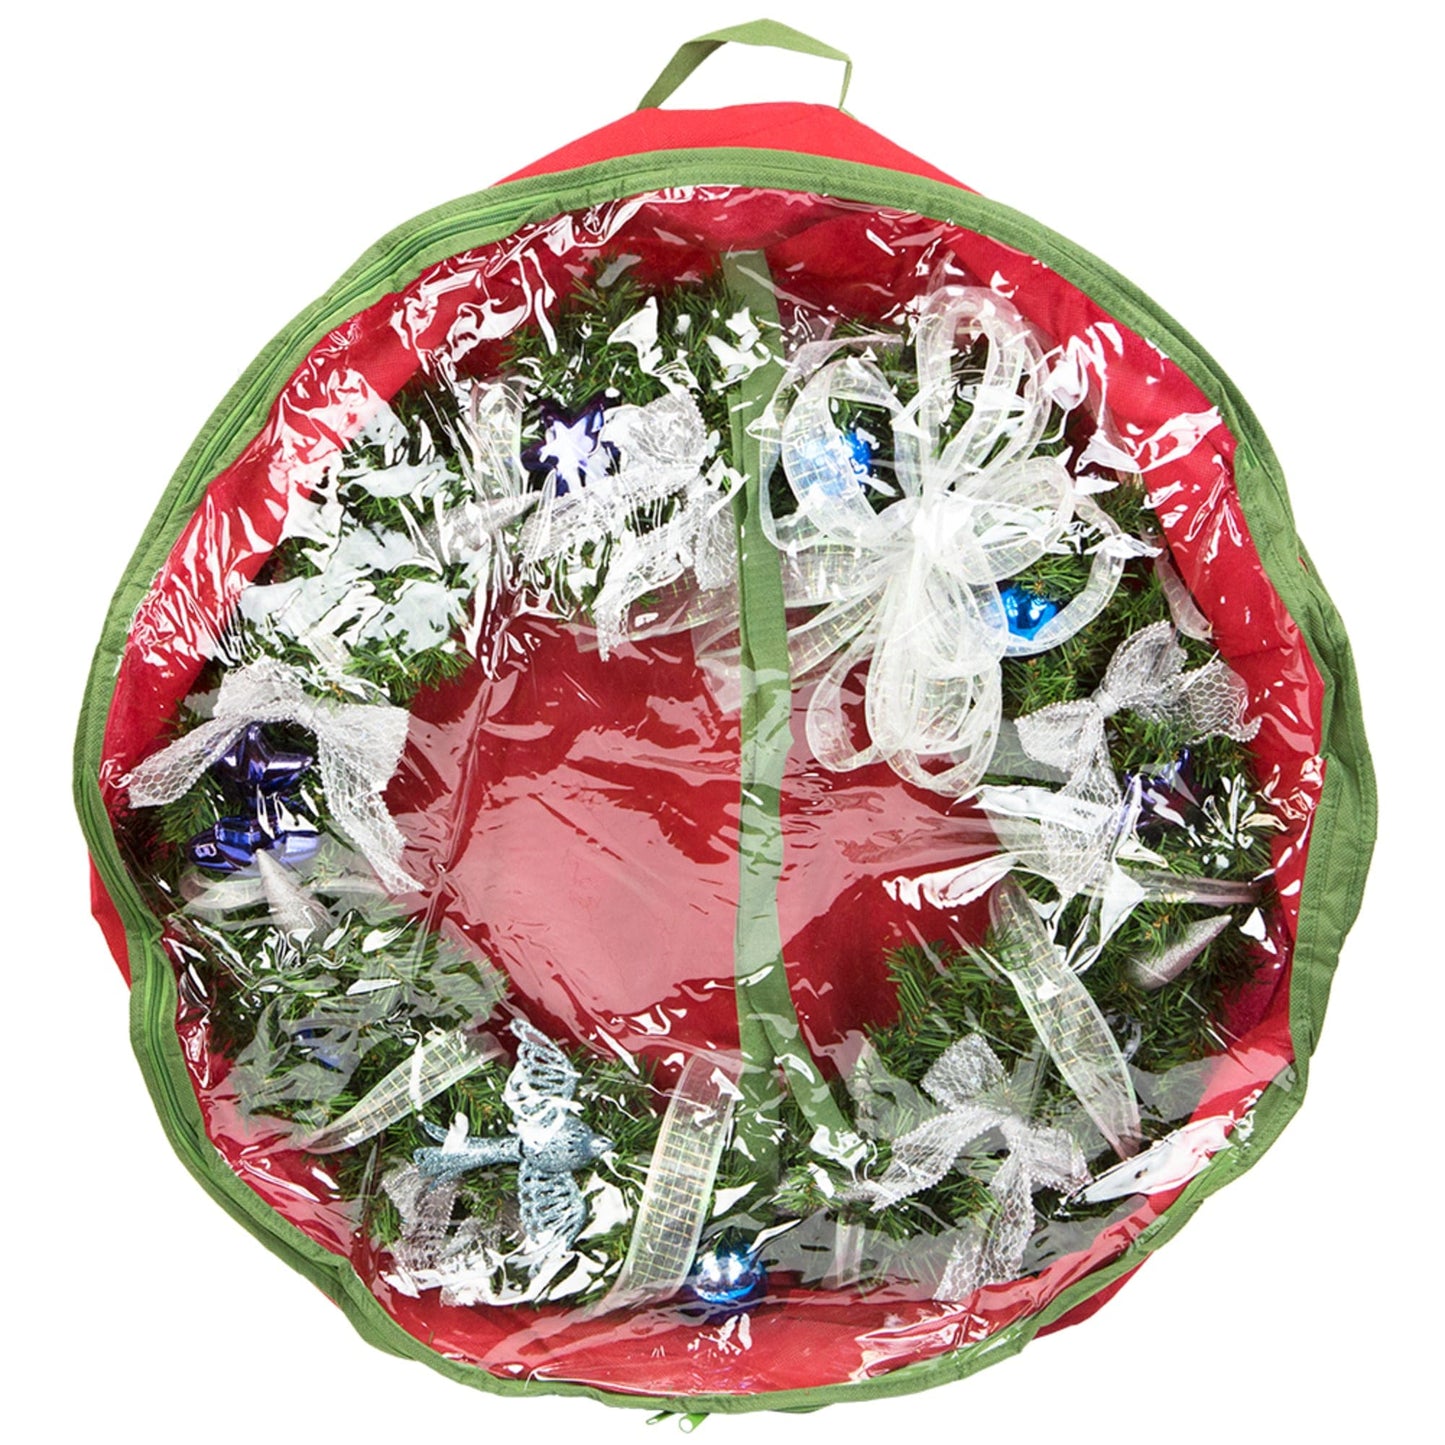 Textured PVC 30" Christmas Wreath Bag, Red/Green